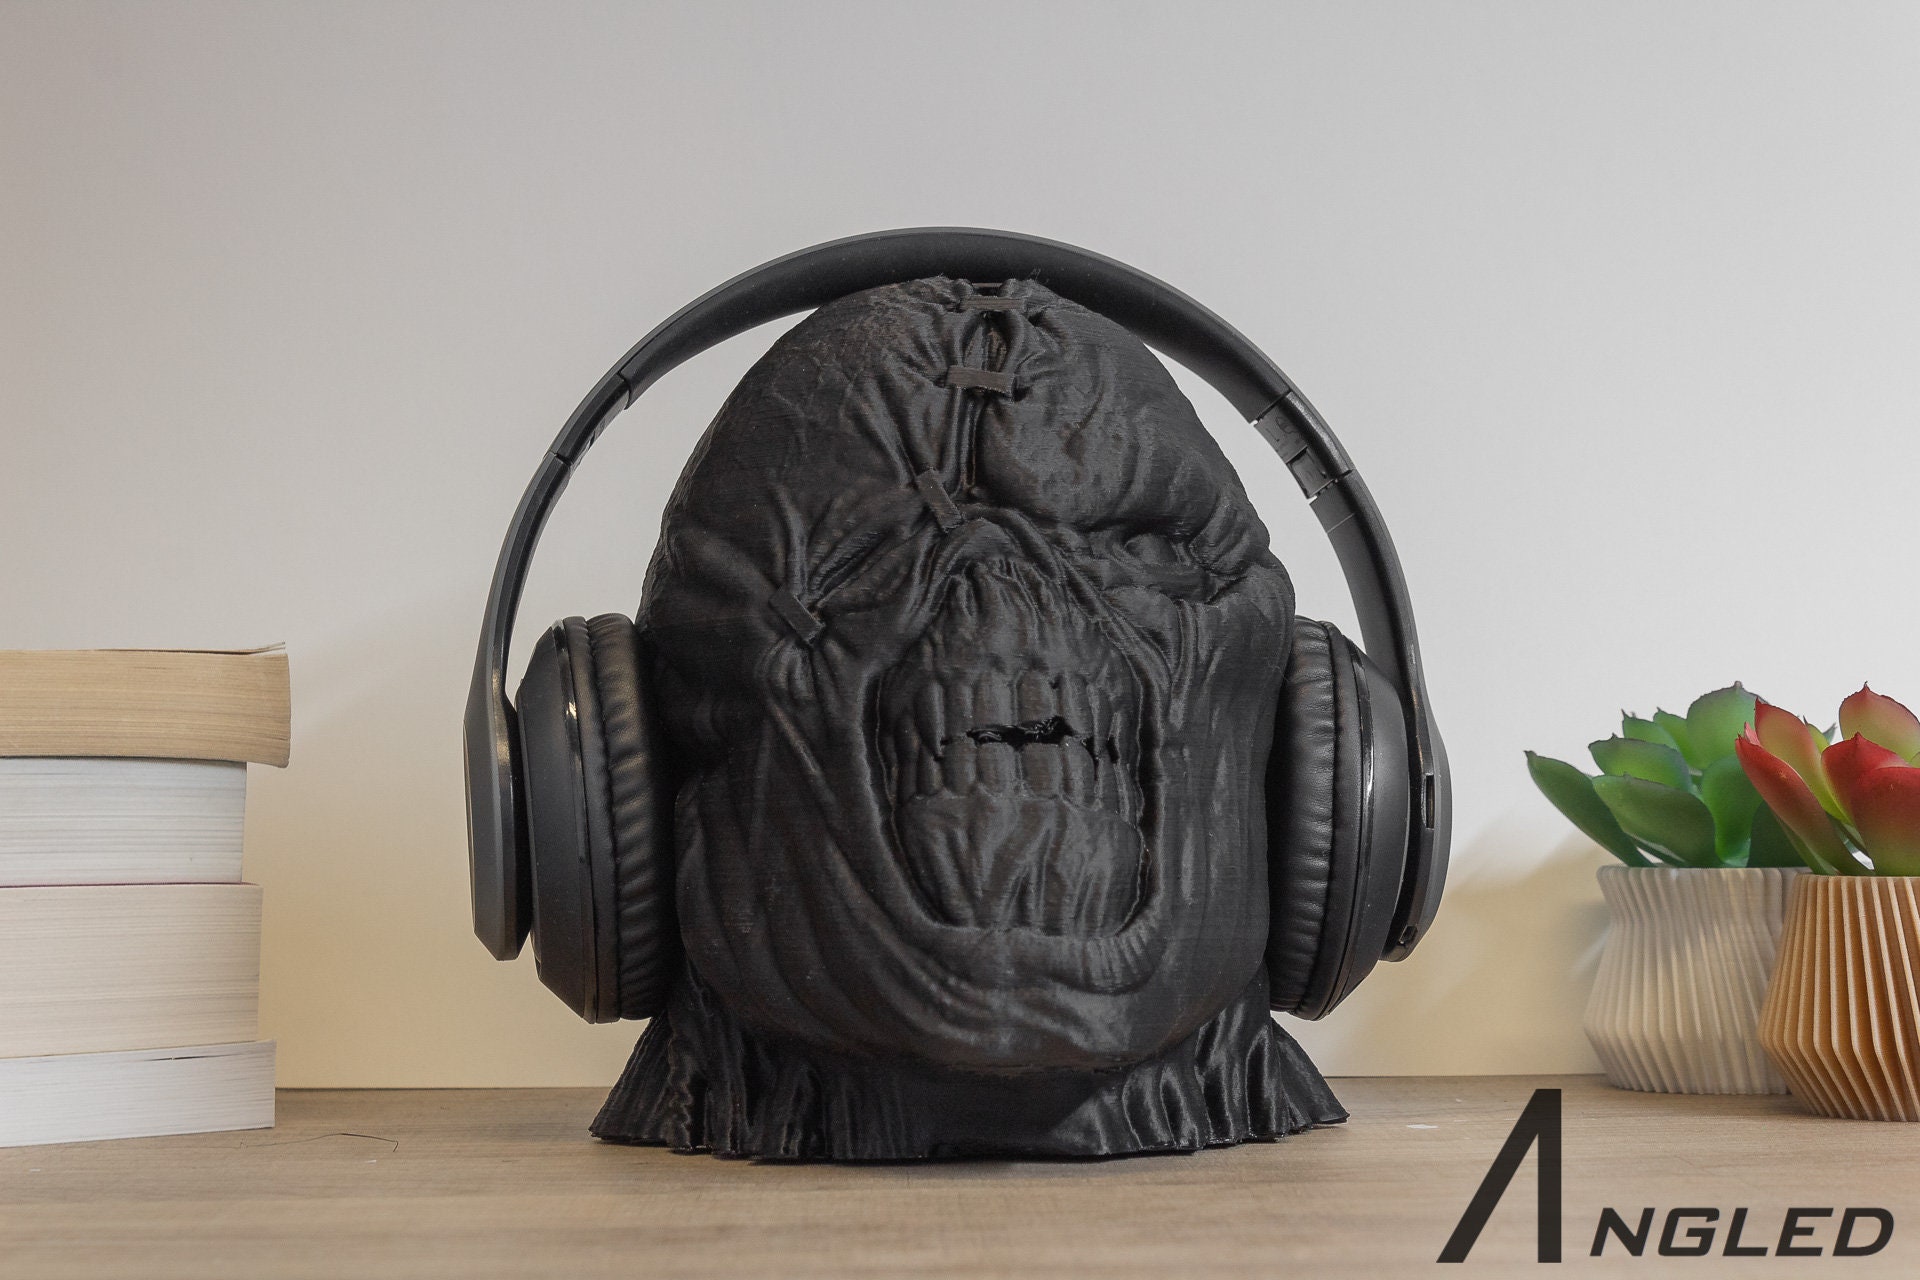  3D Vikings Alien Head Headphone Stand  Headphone Holder, Gaming  Desk Accessories, Office Desk Setup Accessories 3D Printed Headset Stand :  Electronics